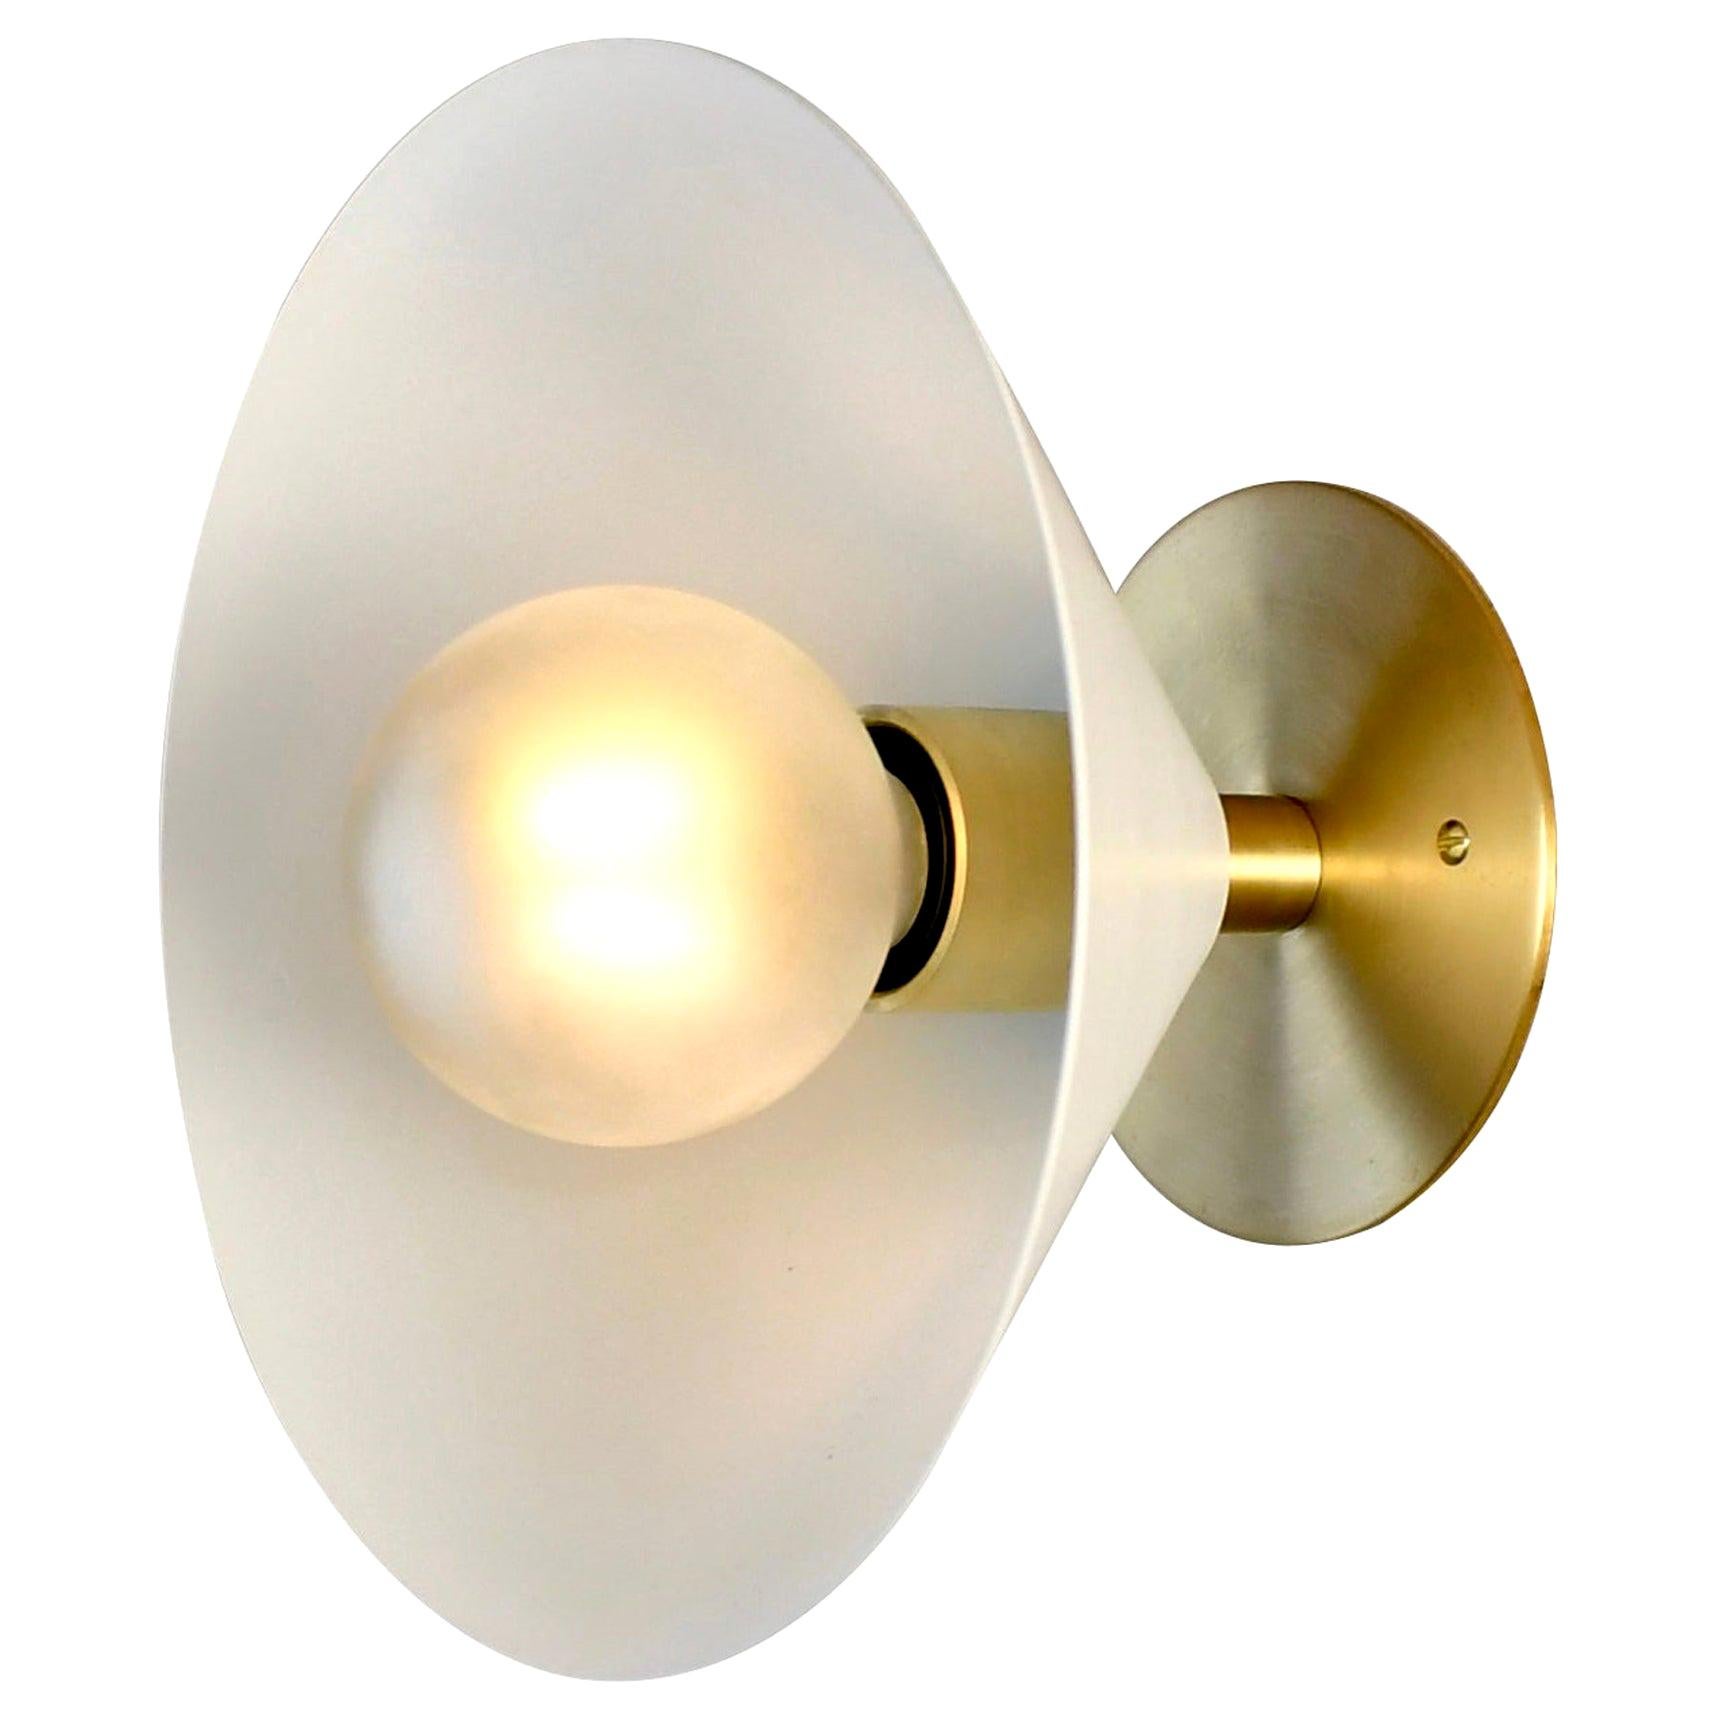 Focal Point Wall Sconce in Brass and White Enamel by Blueprint Lighting, 2019